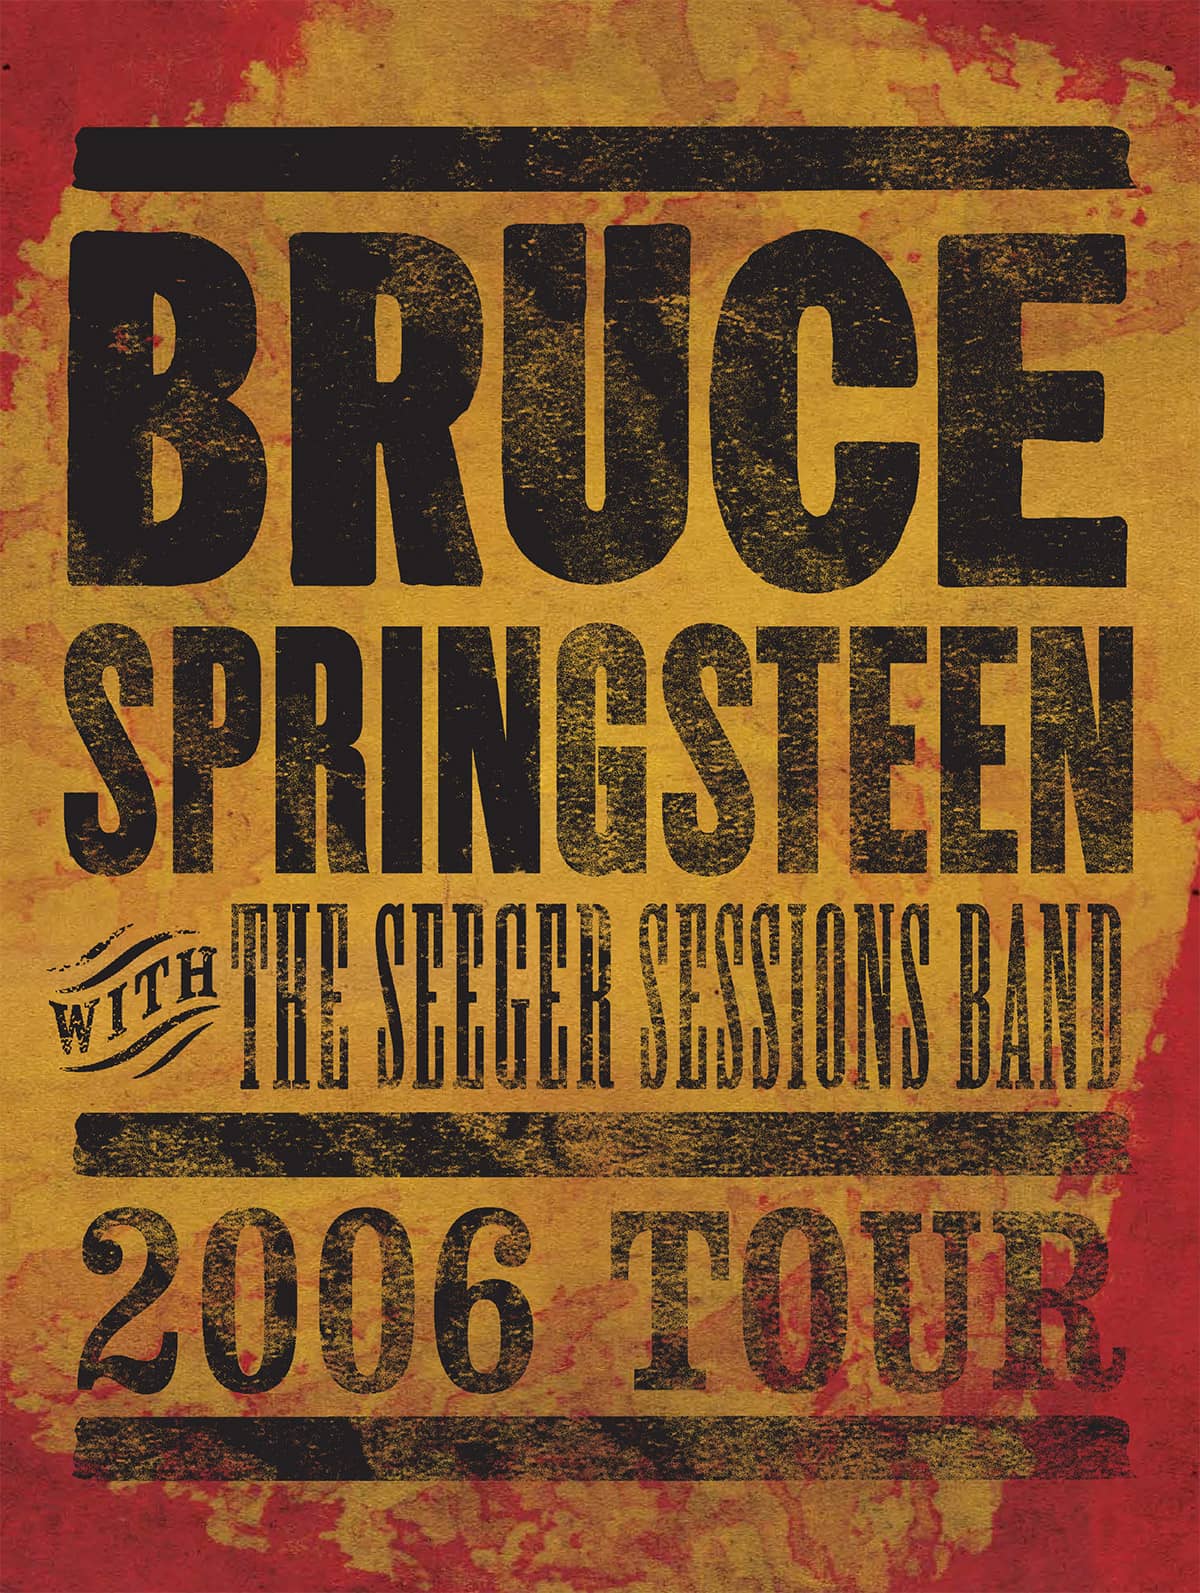 Bruce Springsteen with the Seeger Sessions Band Tour book